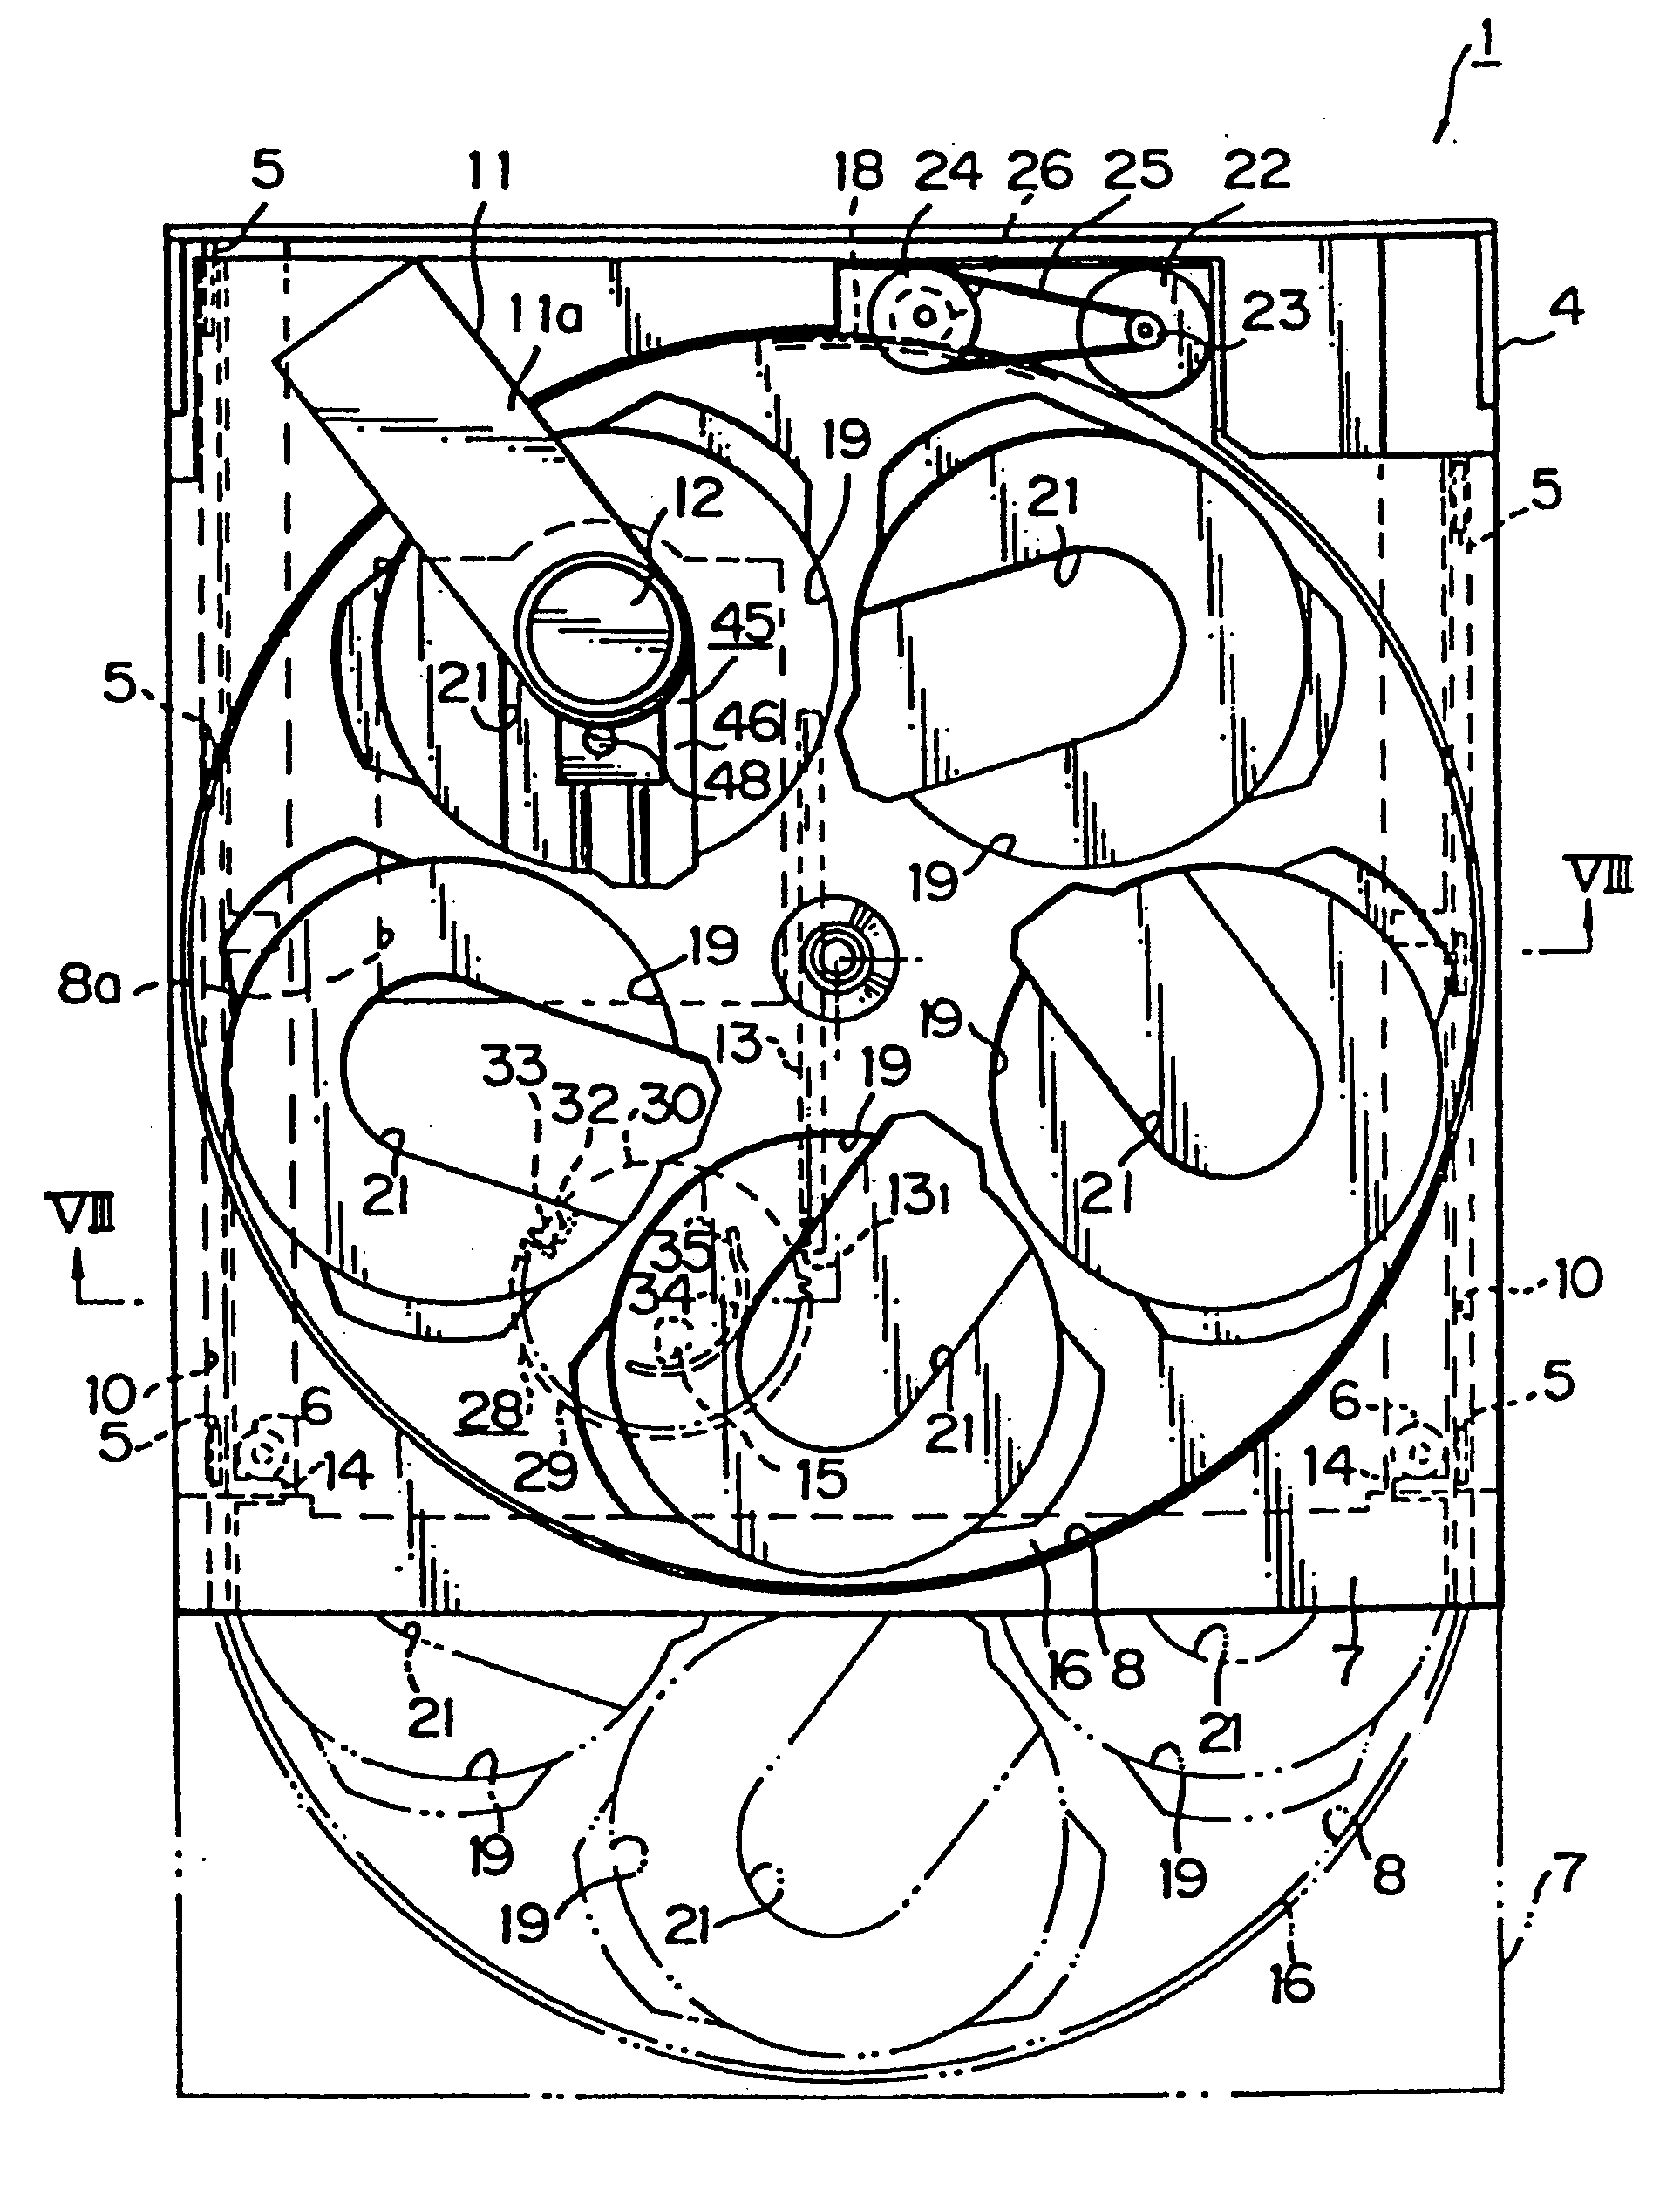 Disc loading mechanism in a disc player for positioning a disc and an optical pickup while reducing mechanical shocks to the disc tray